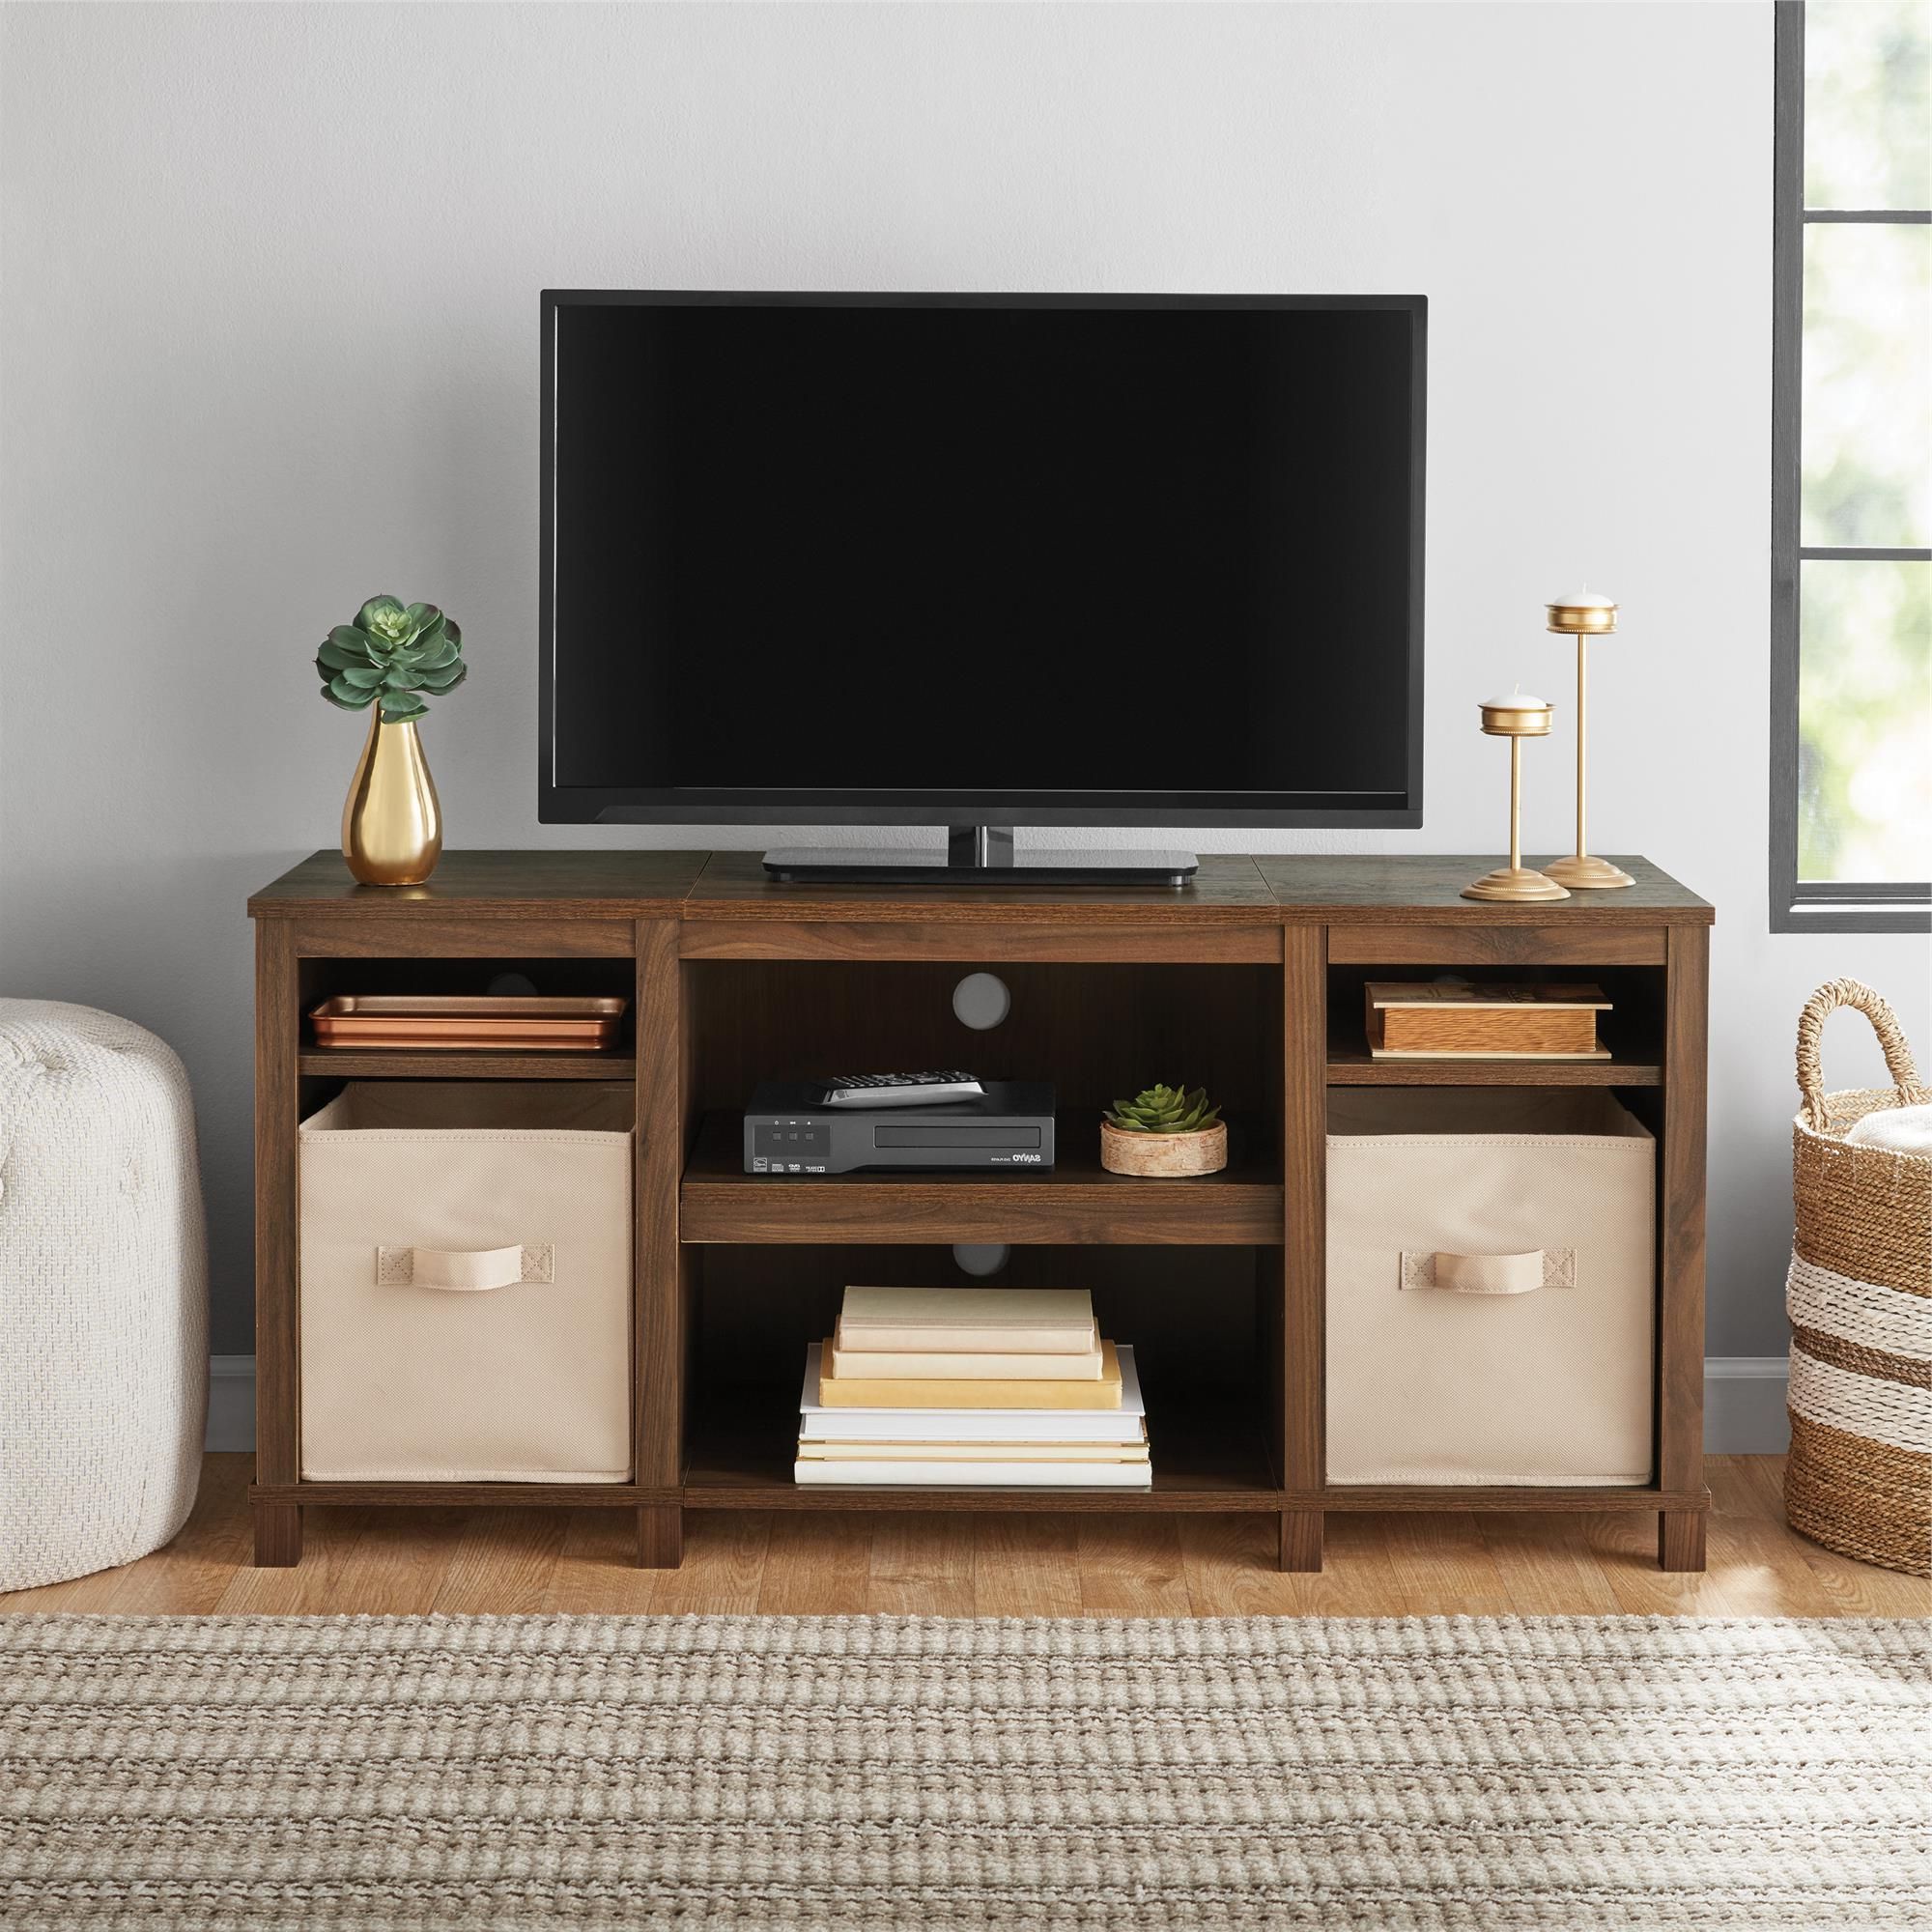 Mainstays Parsons Cubby Tv Stand For Tvs Up To 50", Walnut Intended For Tv Stands For Tvs Up To 50" (Gallery 2 of 20)